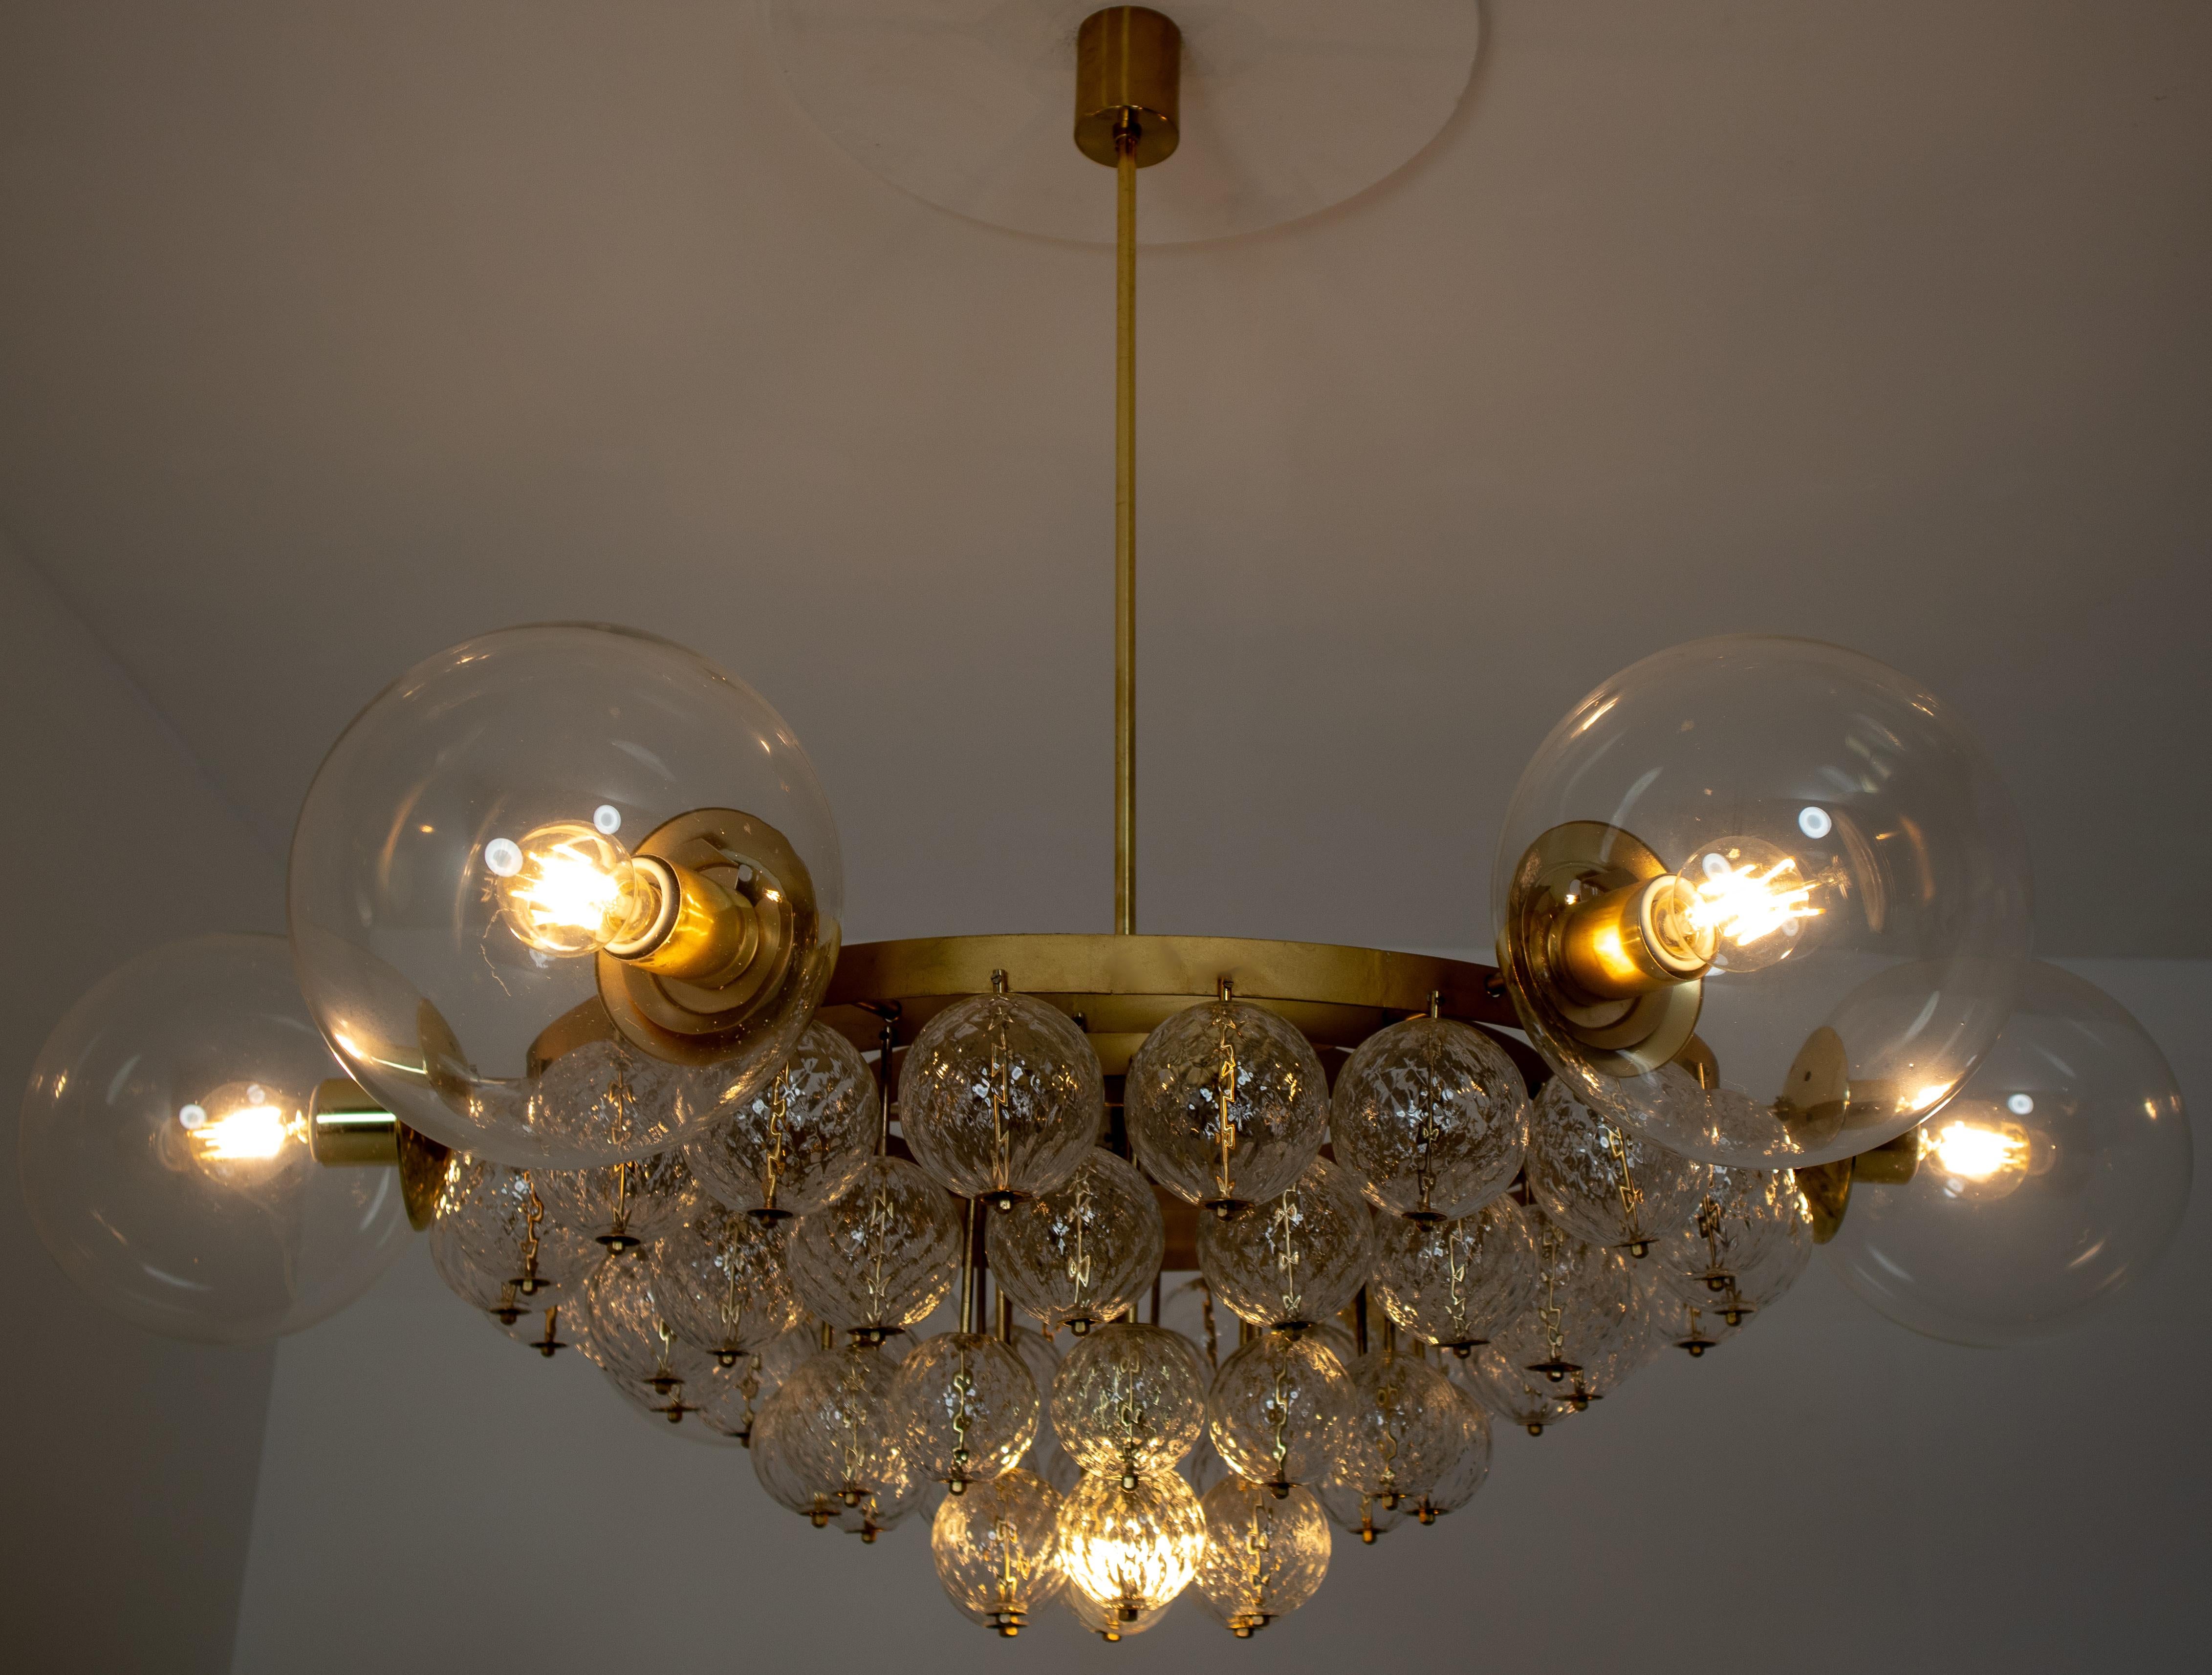 Large Hotel Chandeliers with Brass Fixture and Structured Glass Globes For Sale 2